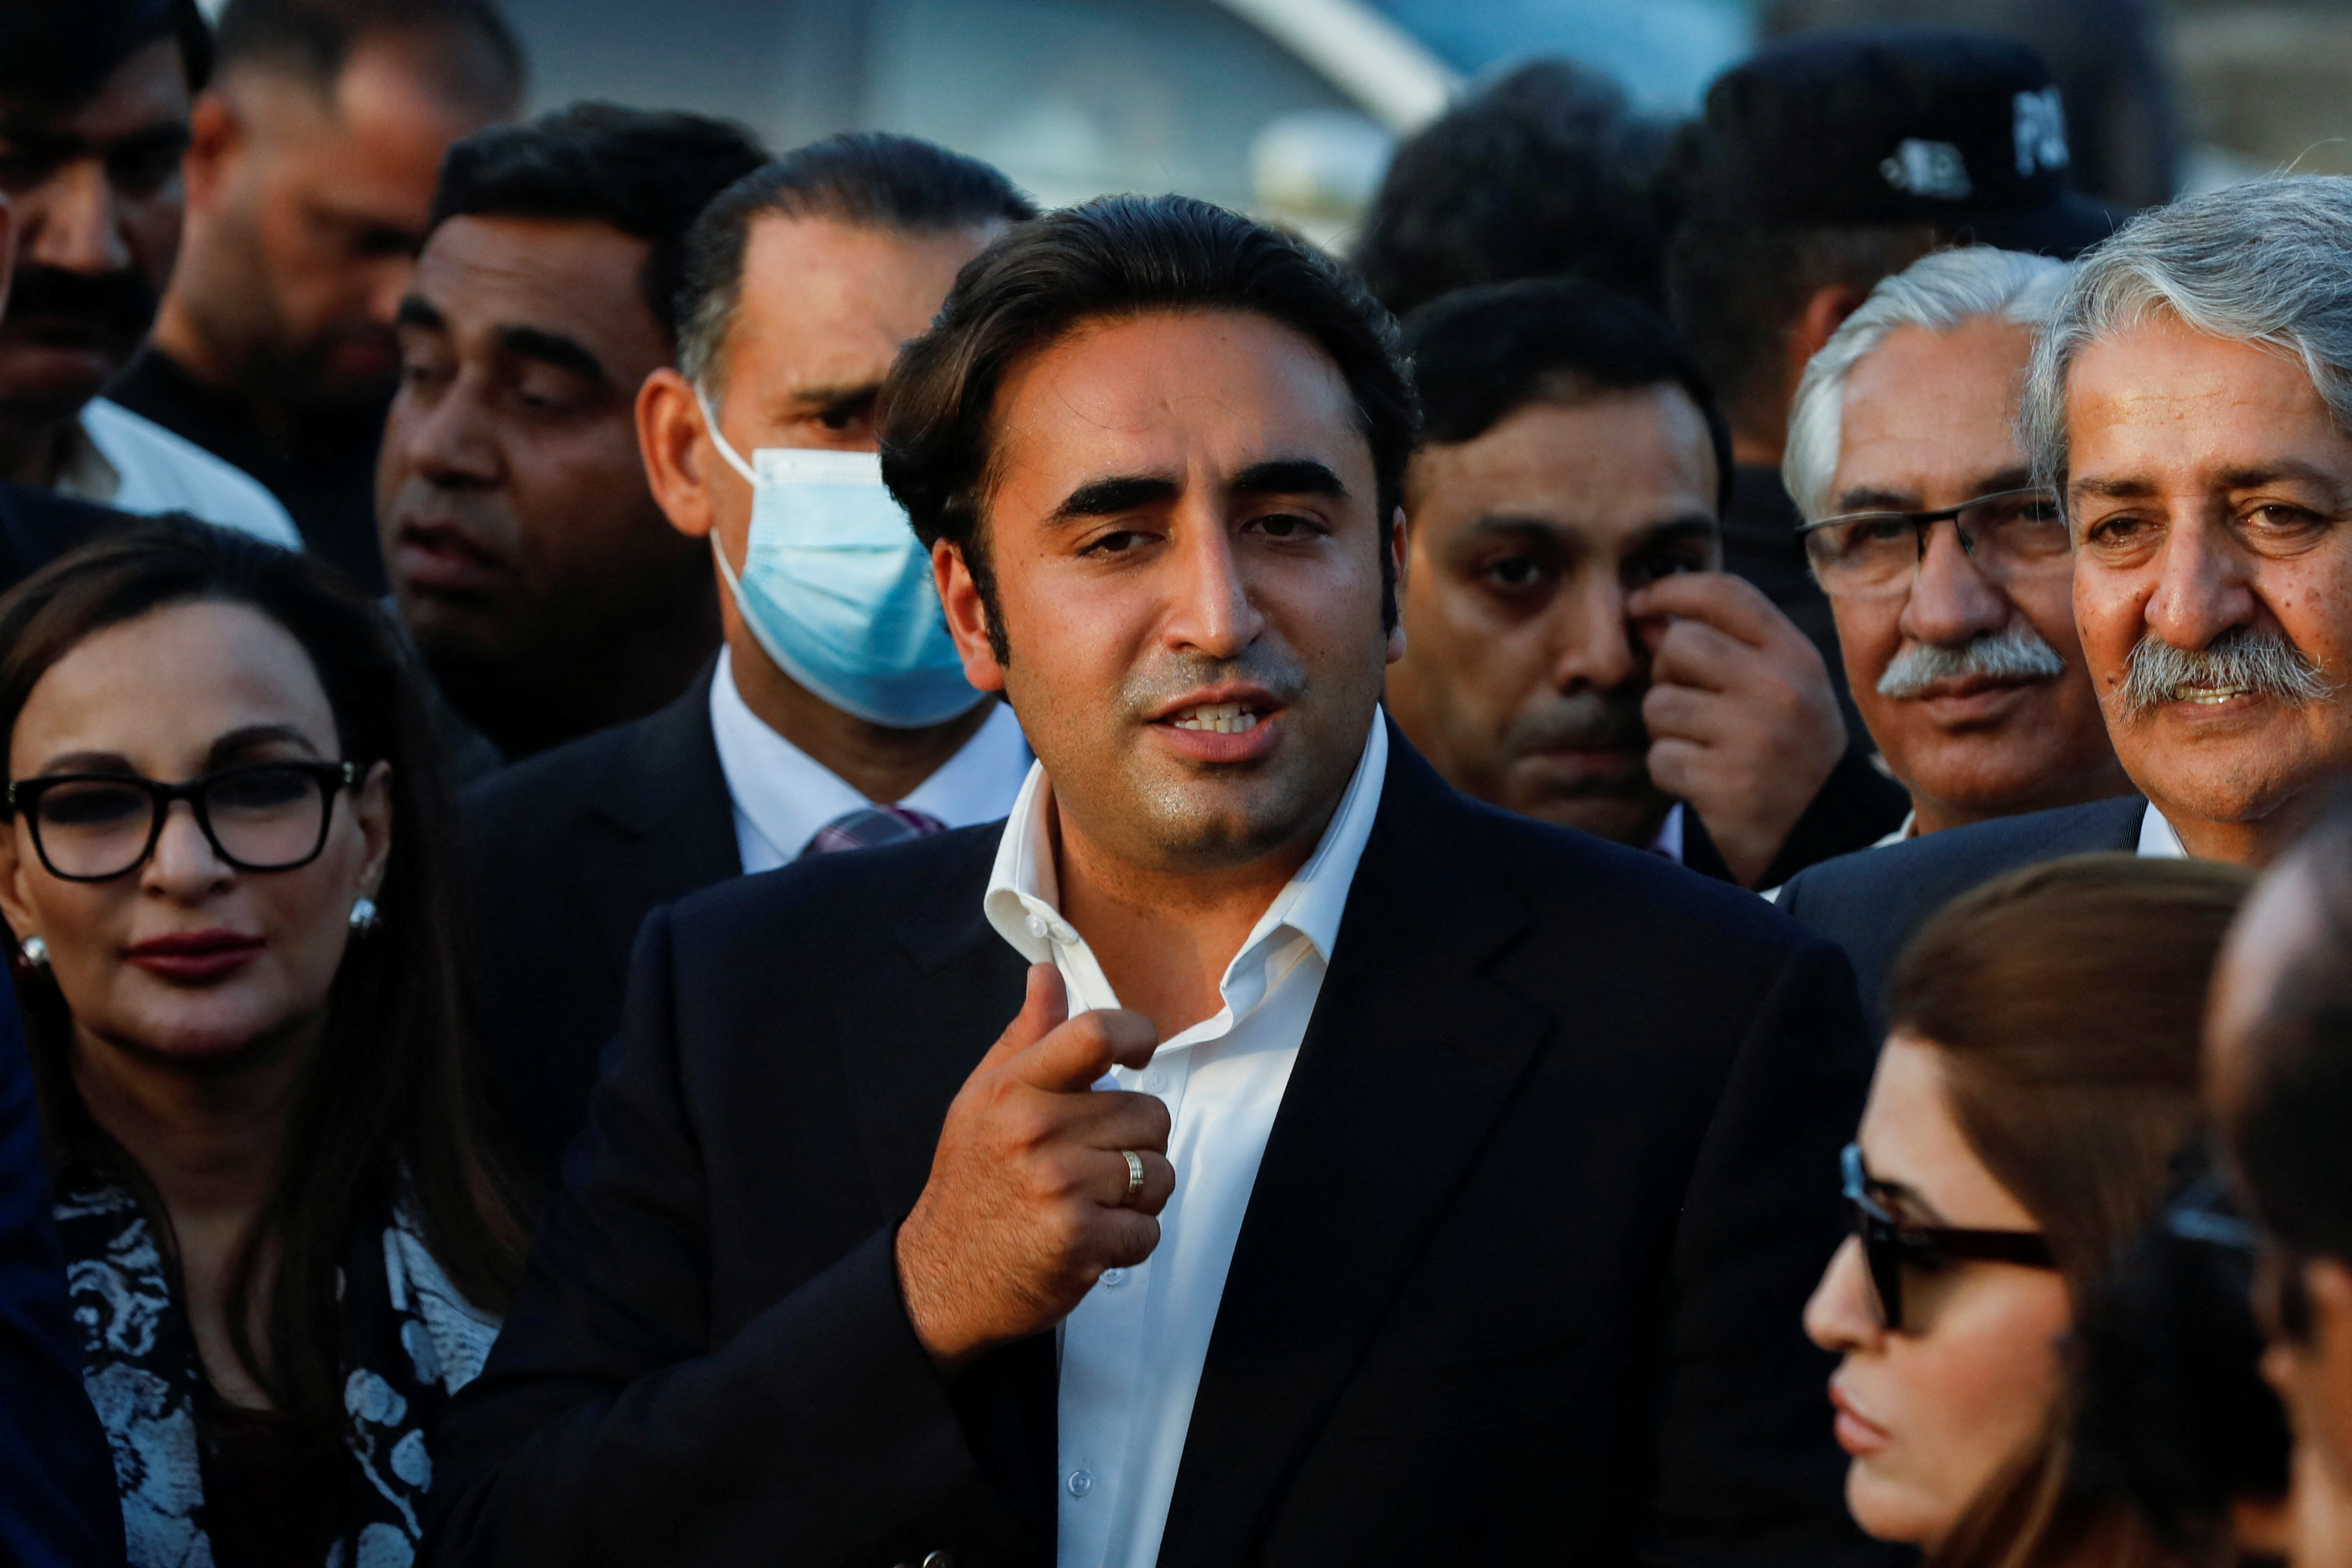 Bilawal Bhutto Zardari, chairman of the Pakistan People's Party, speaks to the media outside the parliament building, in Islamabad